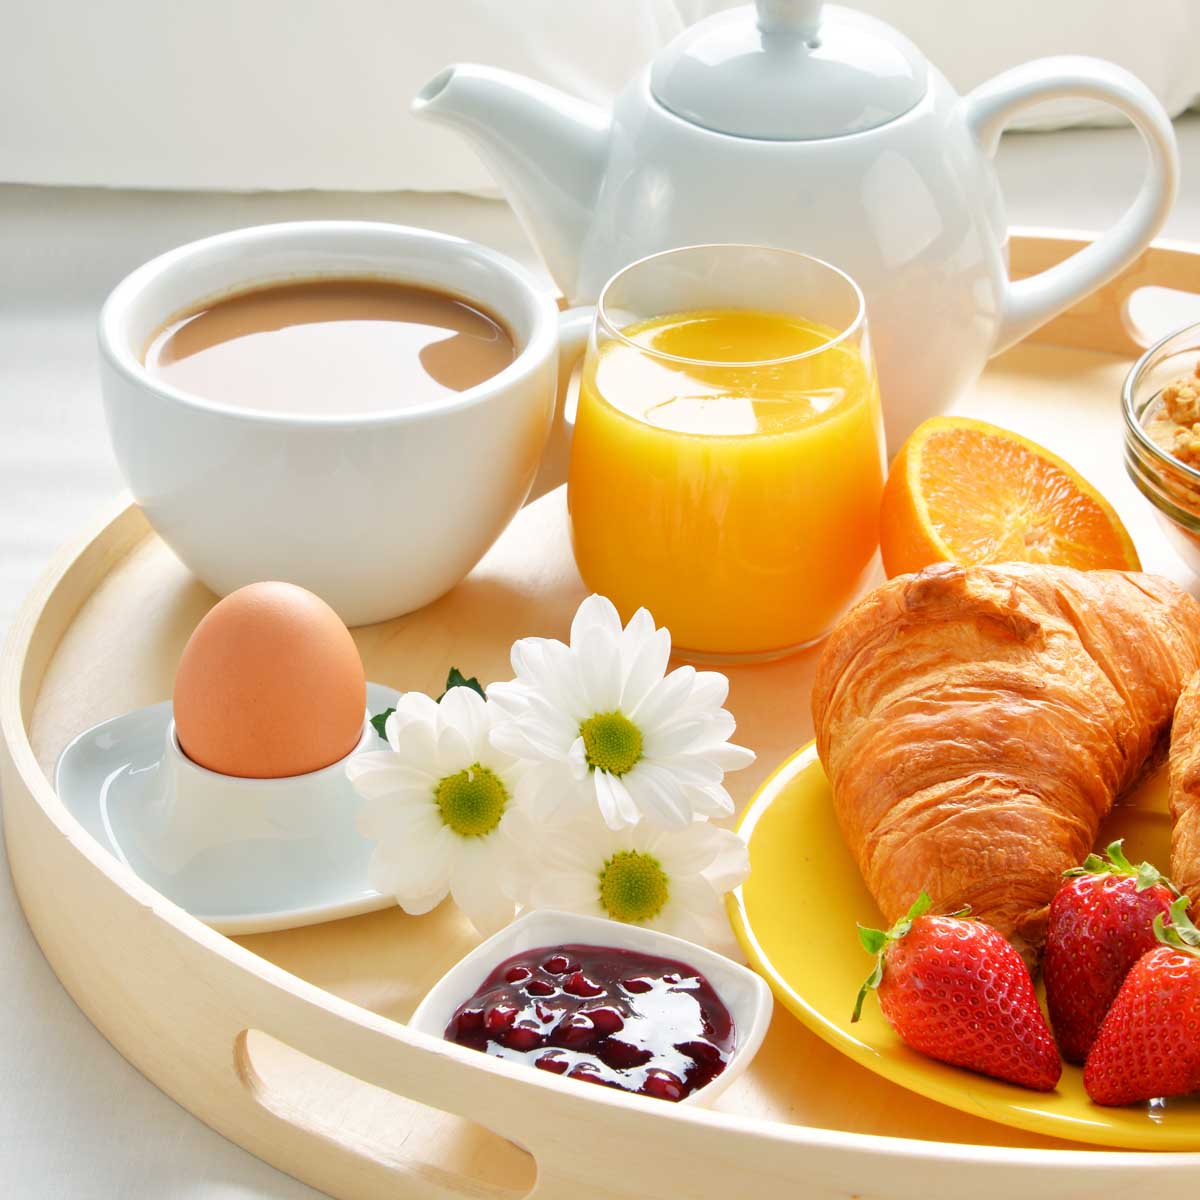 A round tray holds a white tea pot, a coffee cup with milky coffee, 3 fresh daisies, a brown egg, and a yellow plate with a croissant and fresh strawberries with a tiny cup of jam.